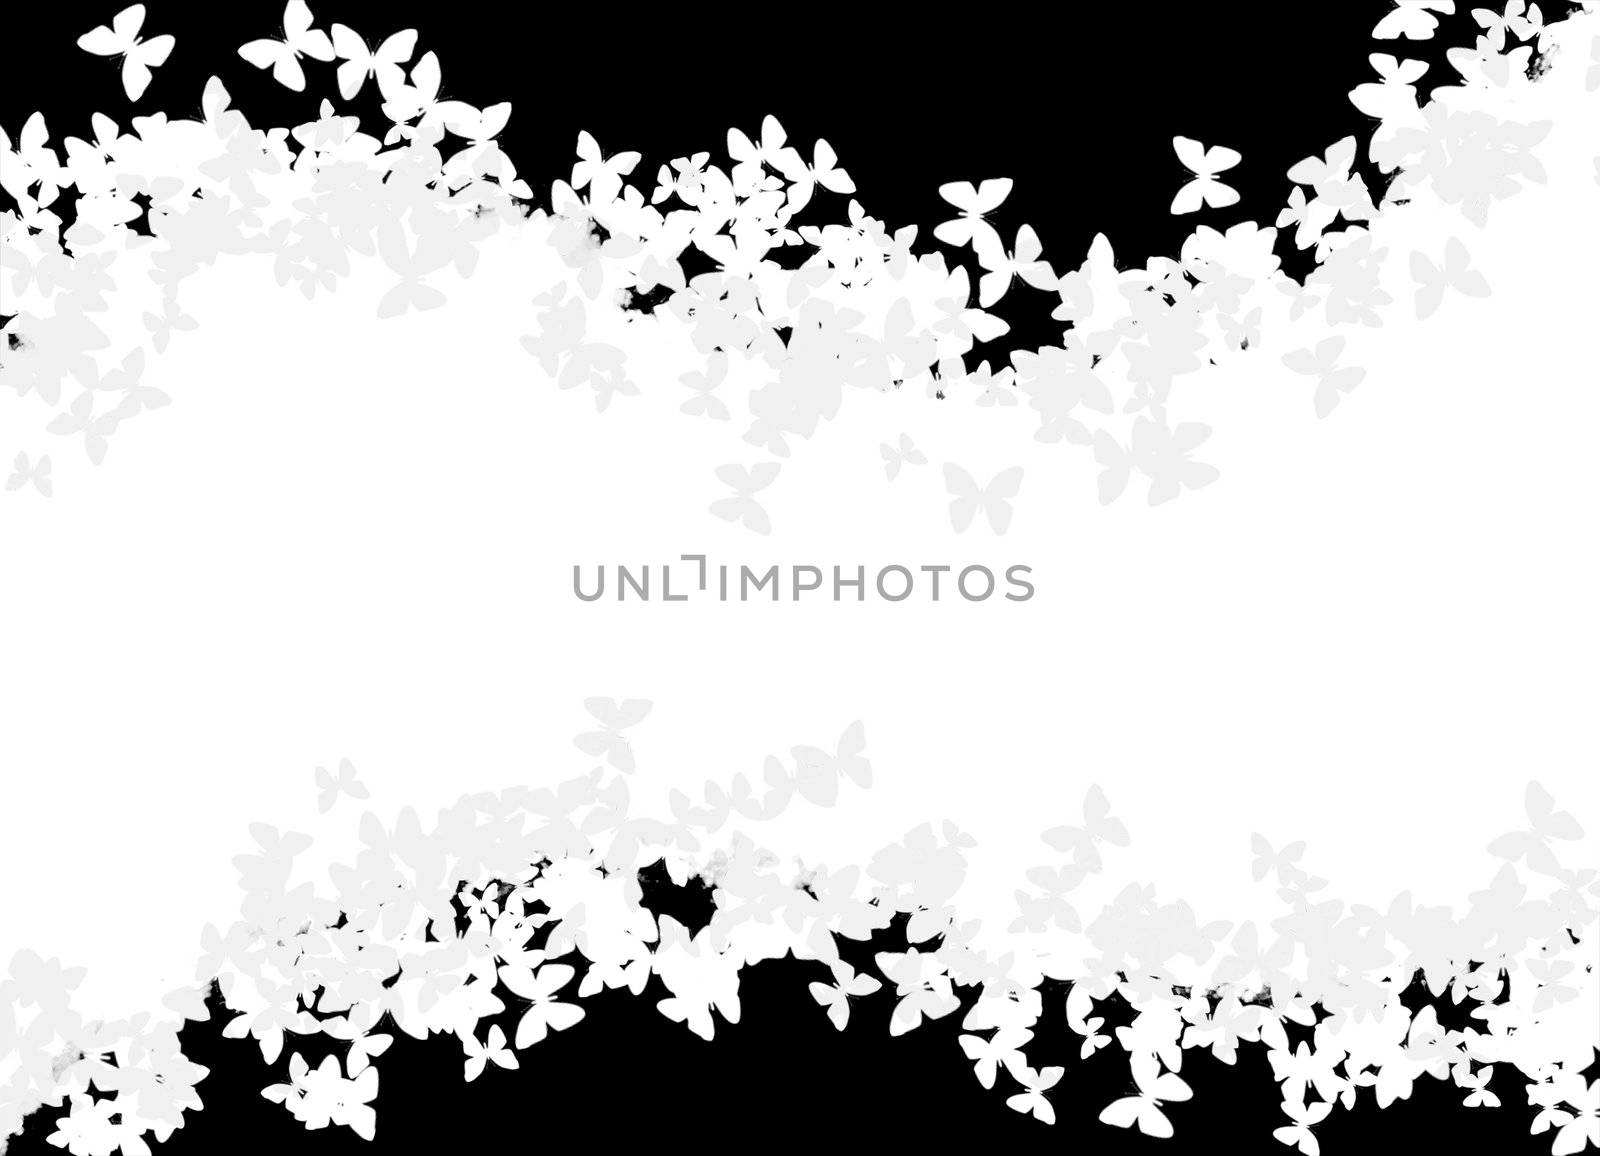 A page layout with butterfly silhouettes in black and white.